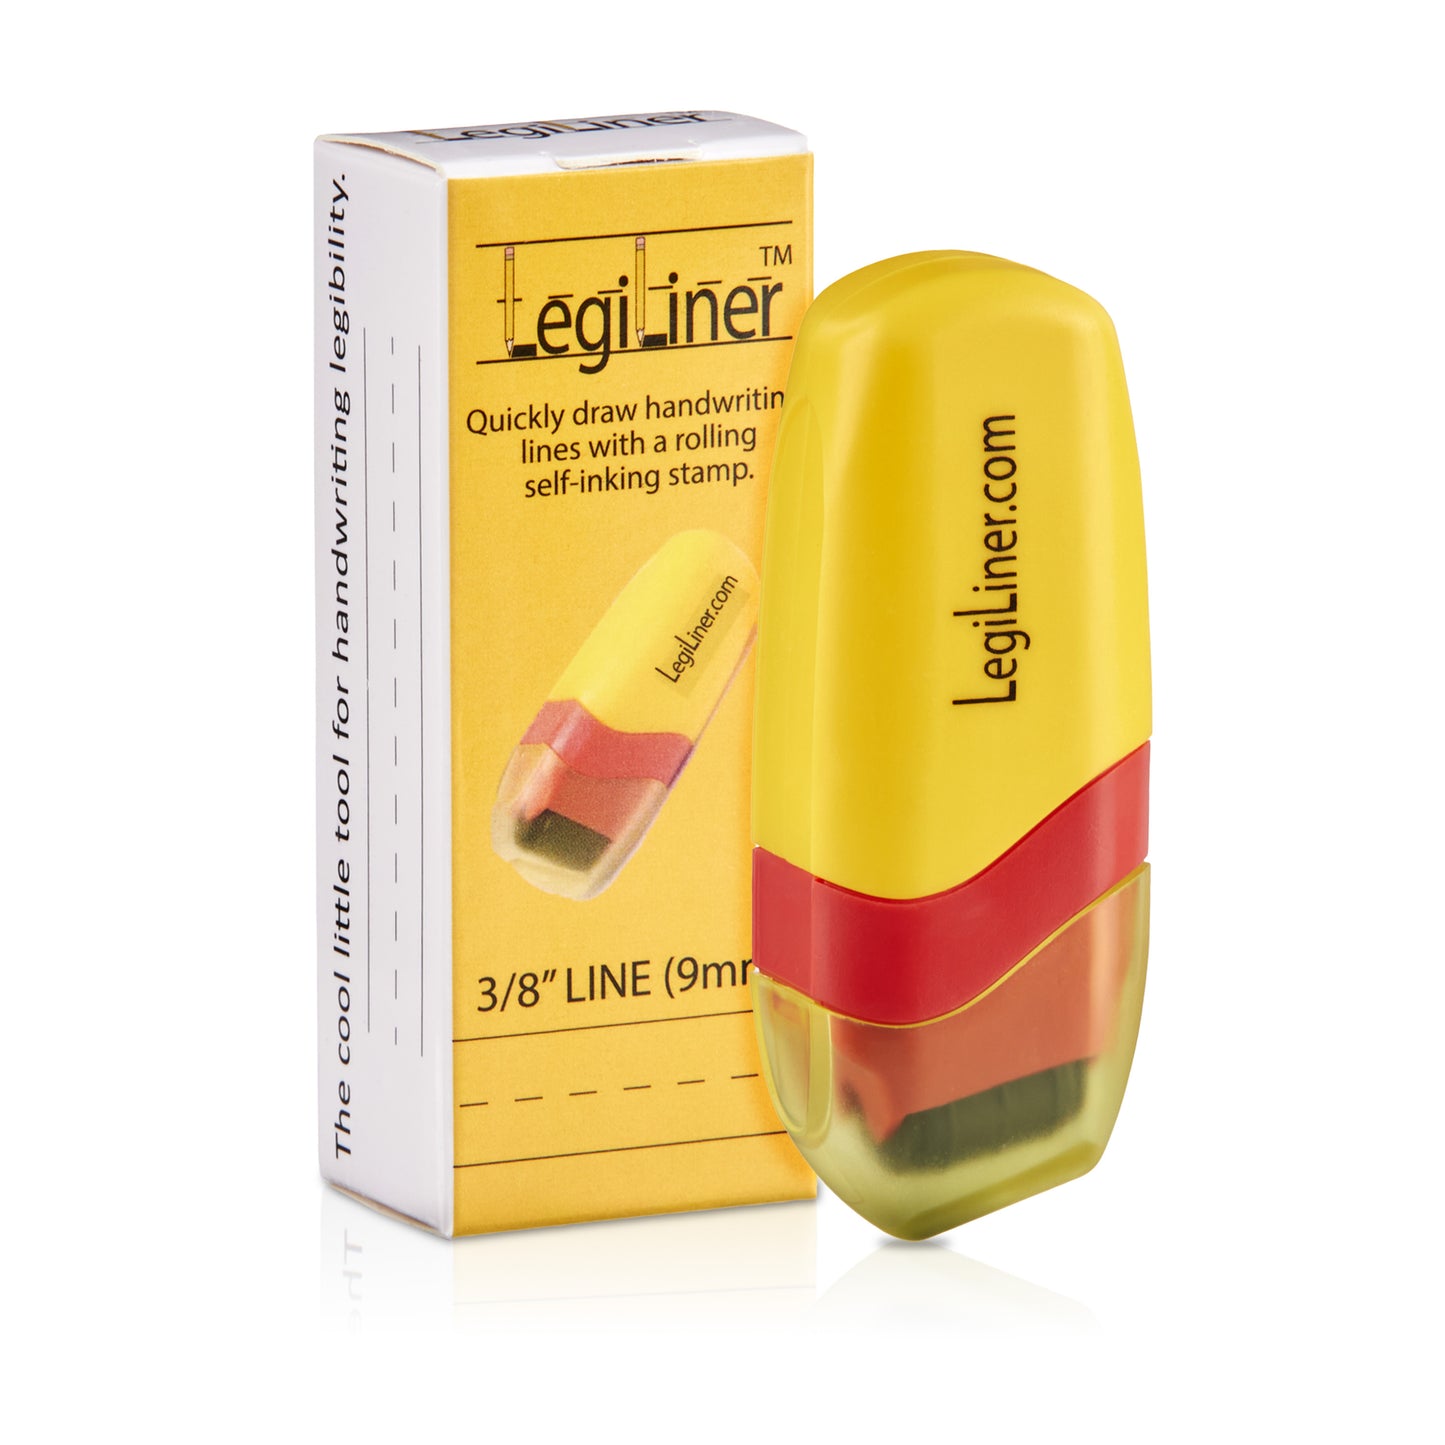 LegiLiner Double Solid Line 3/8' tall, Pen Style Rolling Ink Stamp